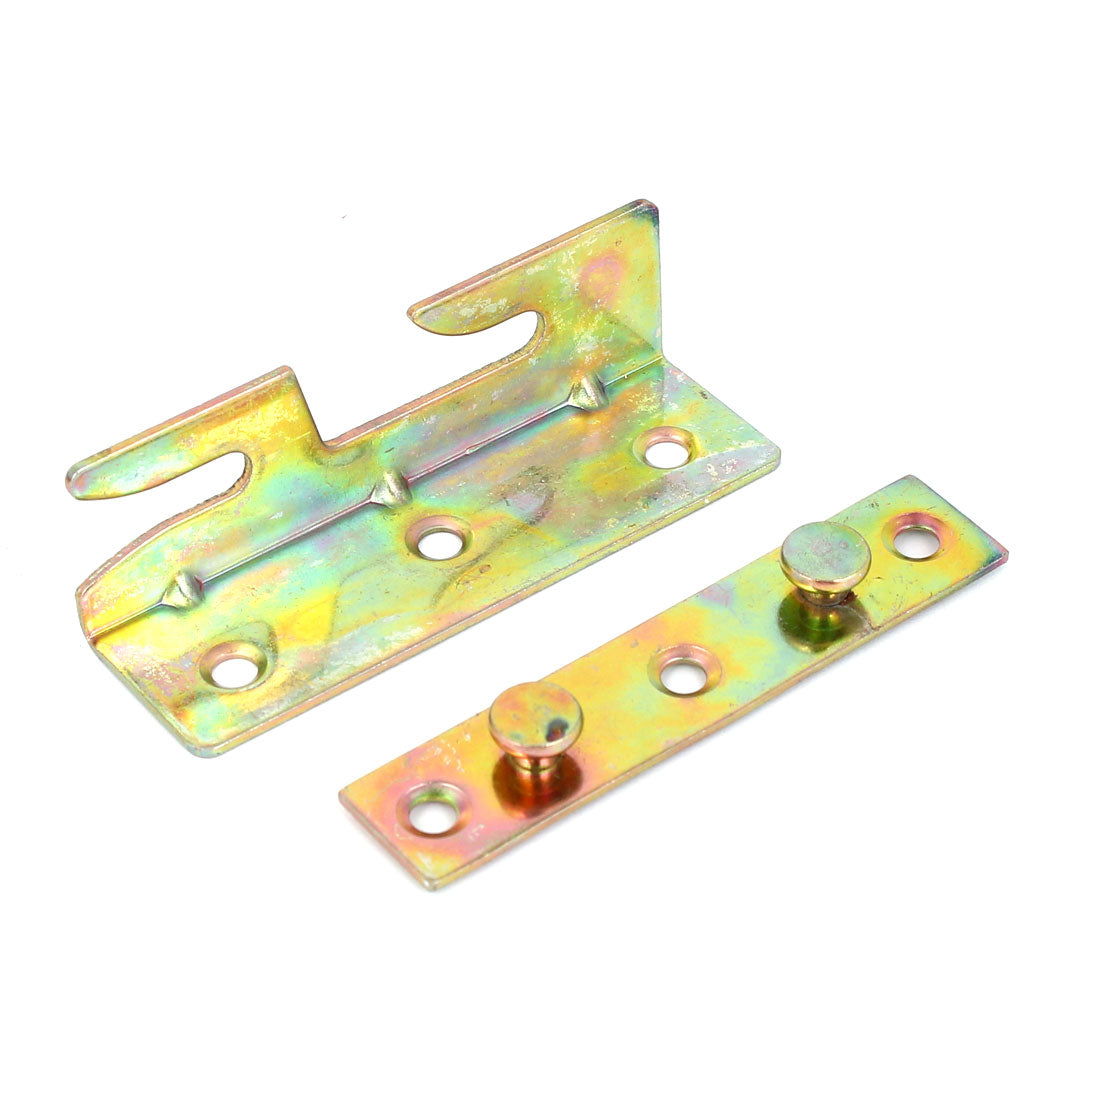 uxcell Uxcell Furniture Wood Bed Fitting Yellow Zinc Plated Snap Connectors Rail Bracket 2Pairs